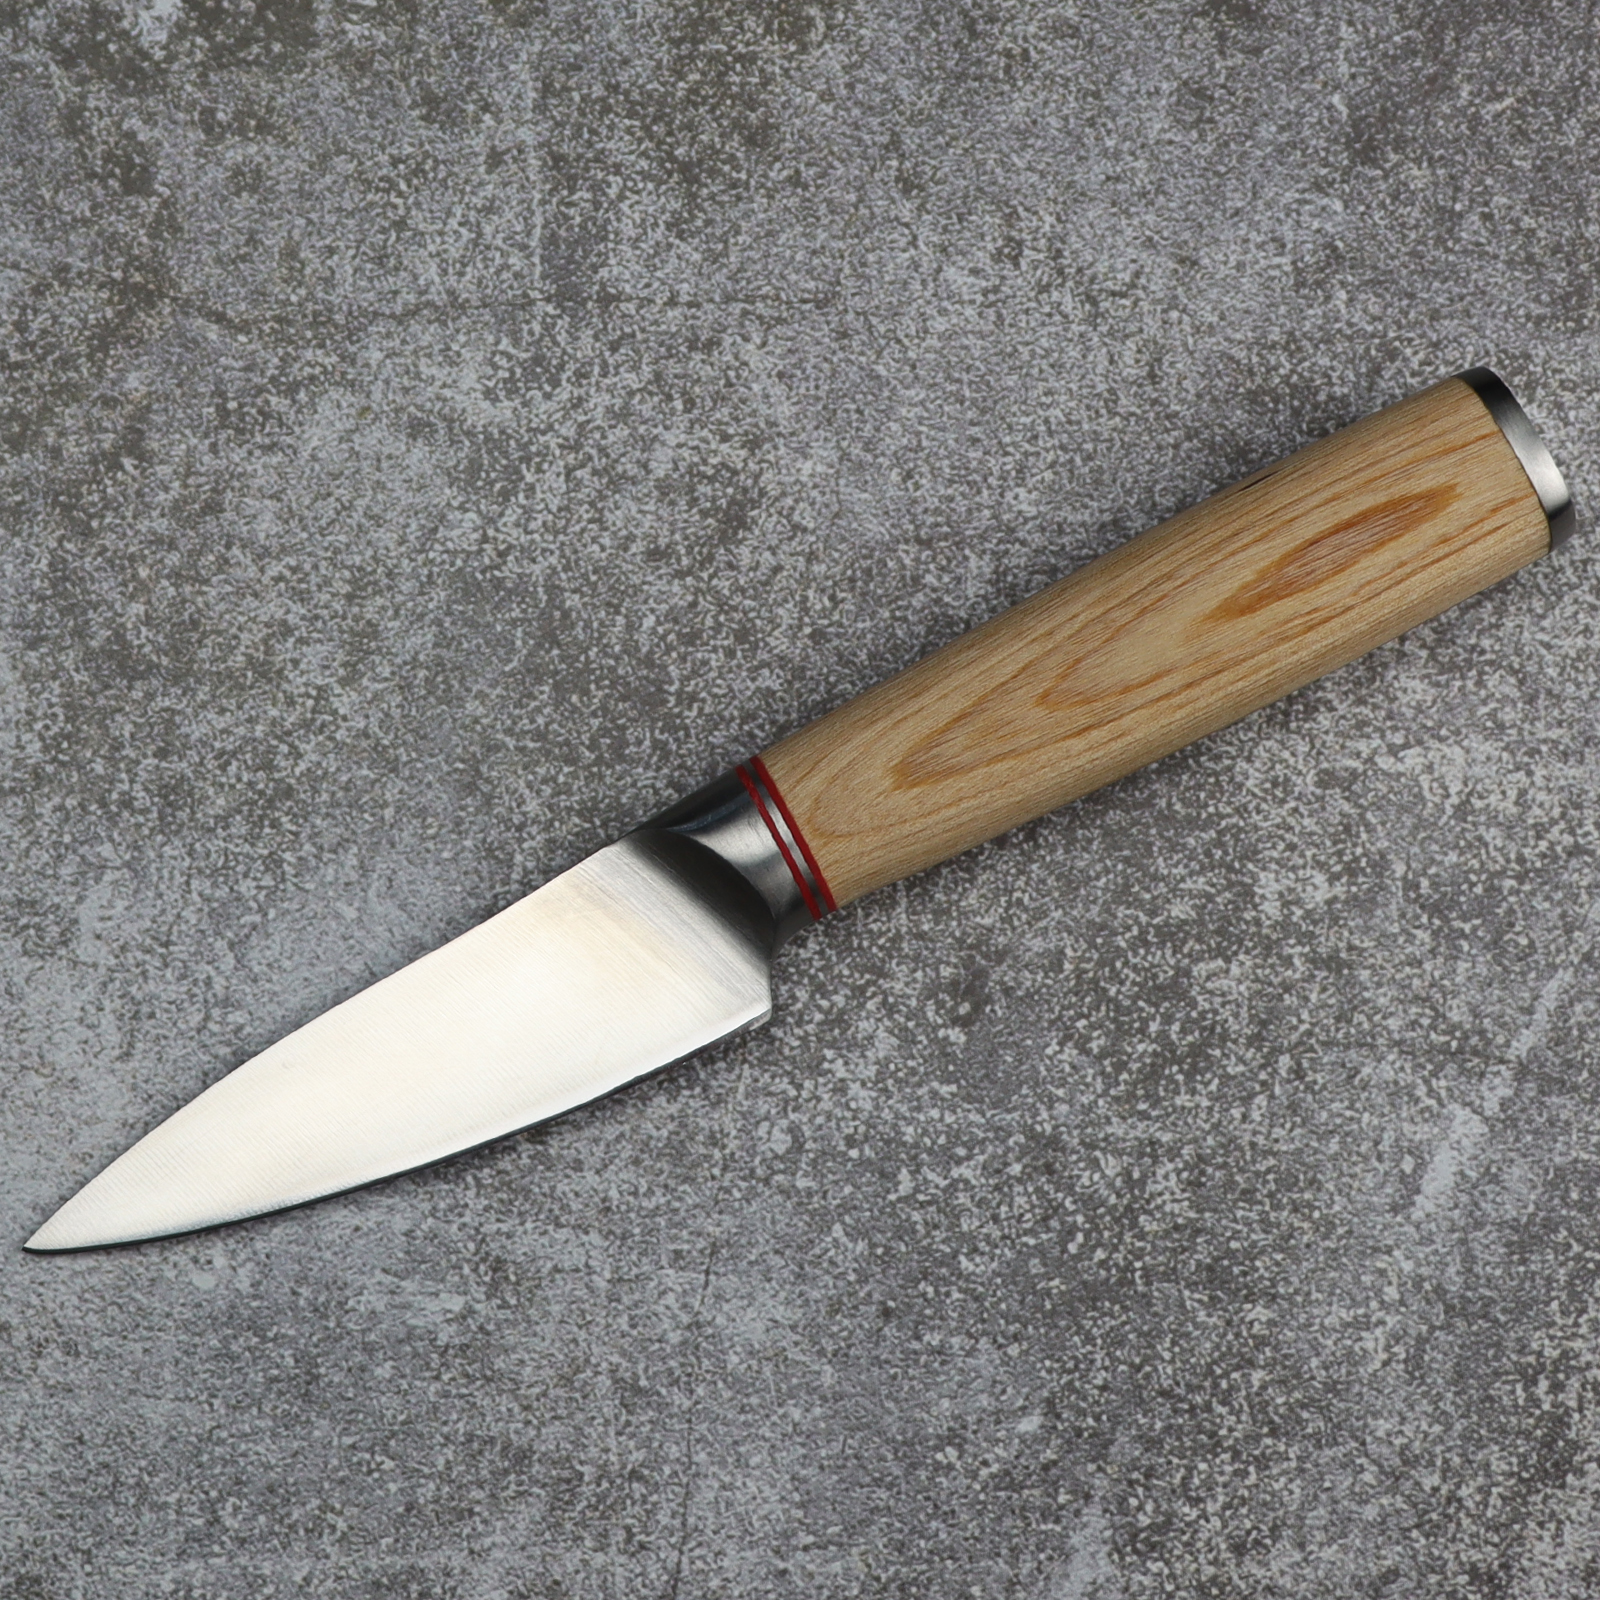 Fzkaly 3.5" Paring Knife For Sale